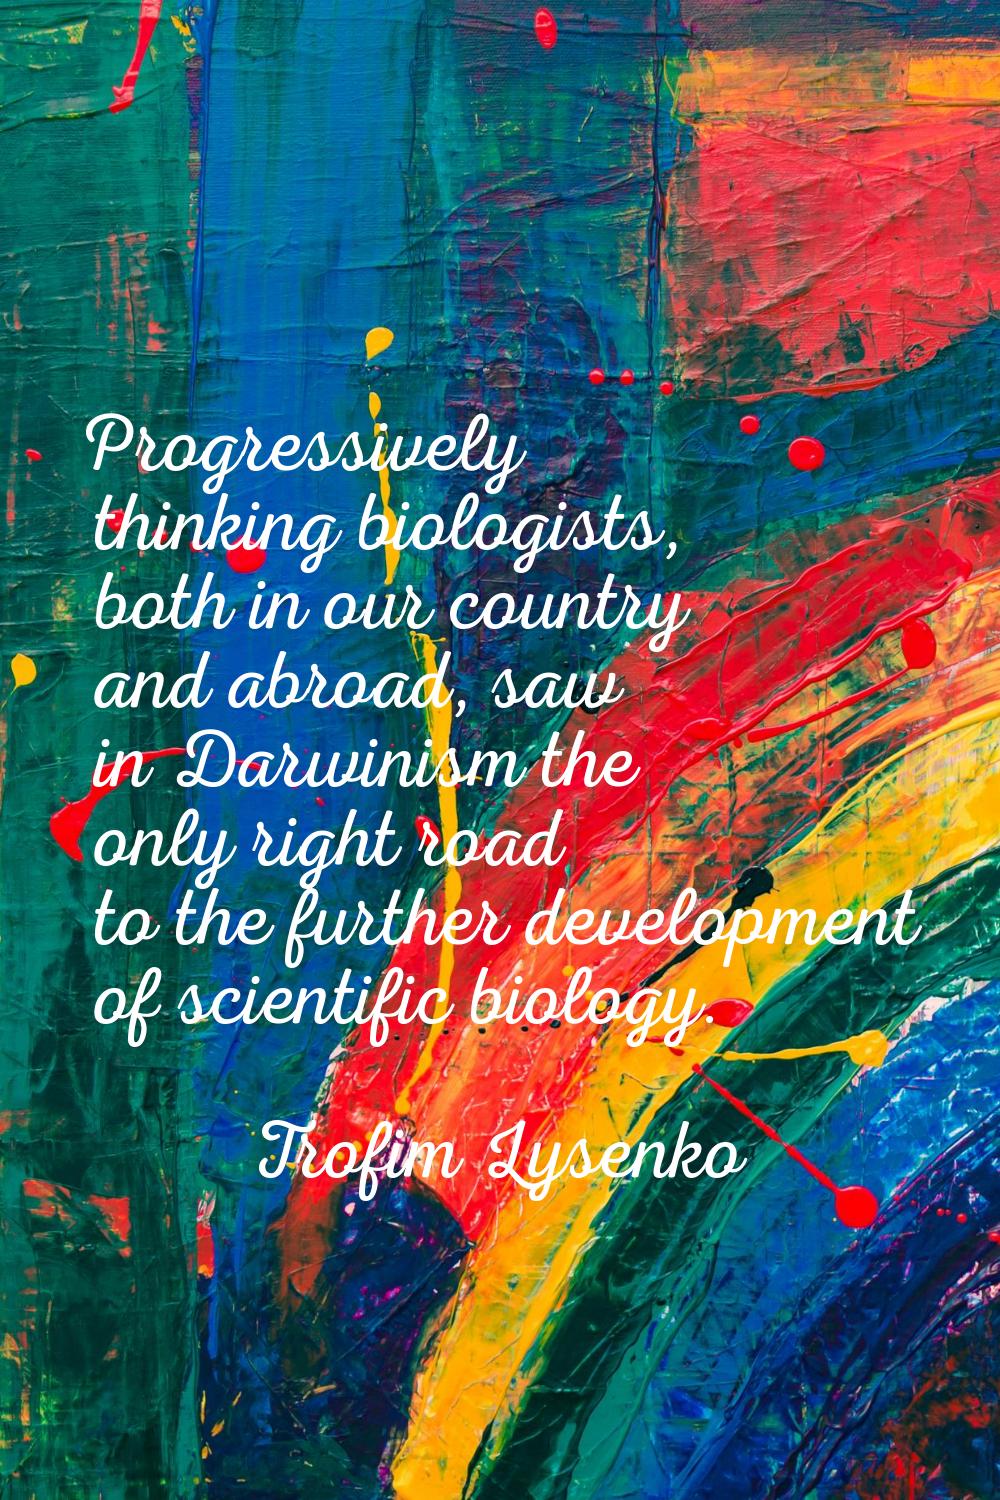 Progressively thinking biologists, both in our country and abroad, saw in Darwinism the only right 